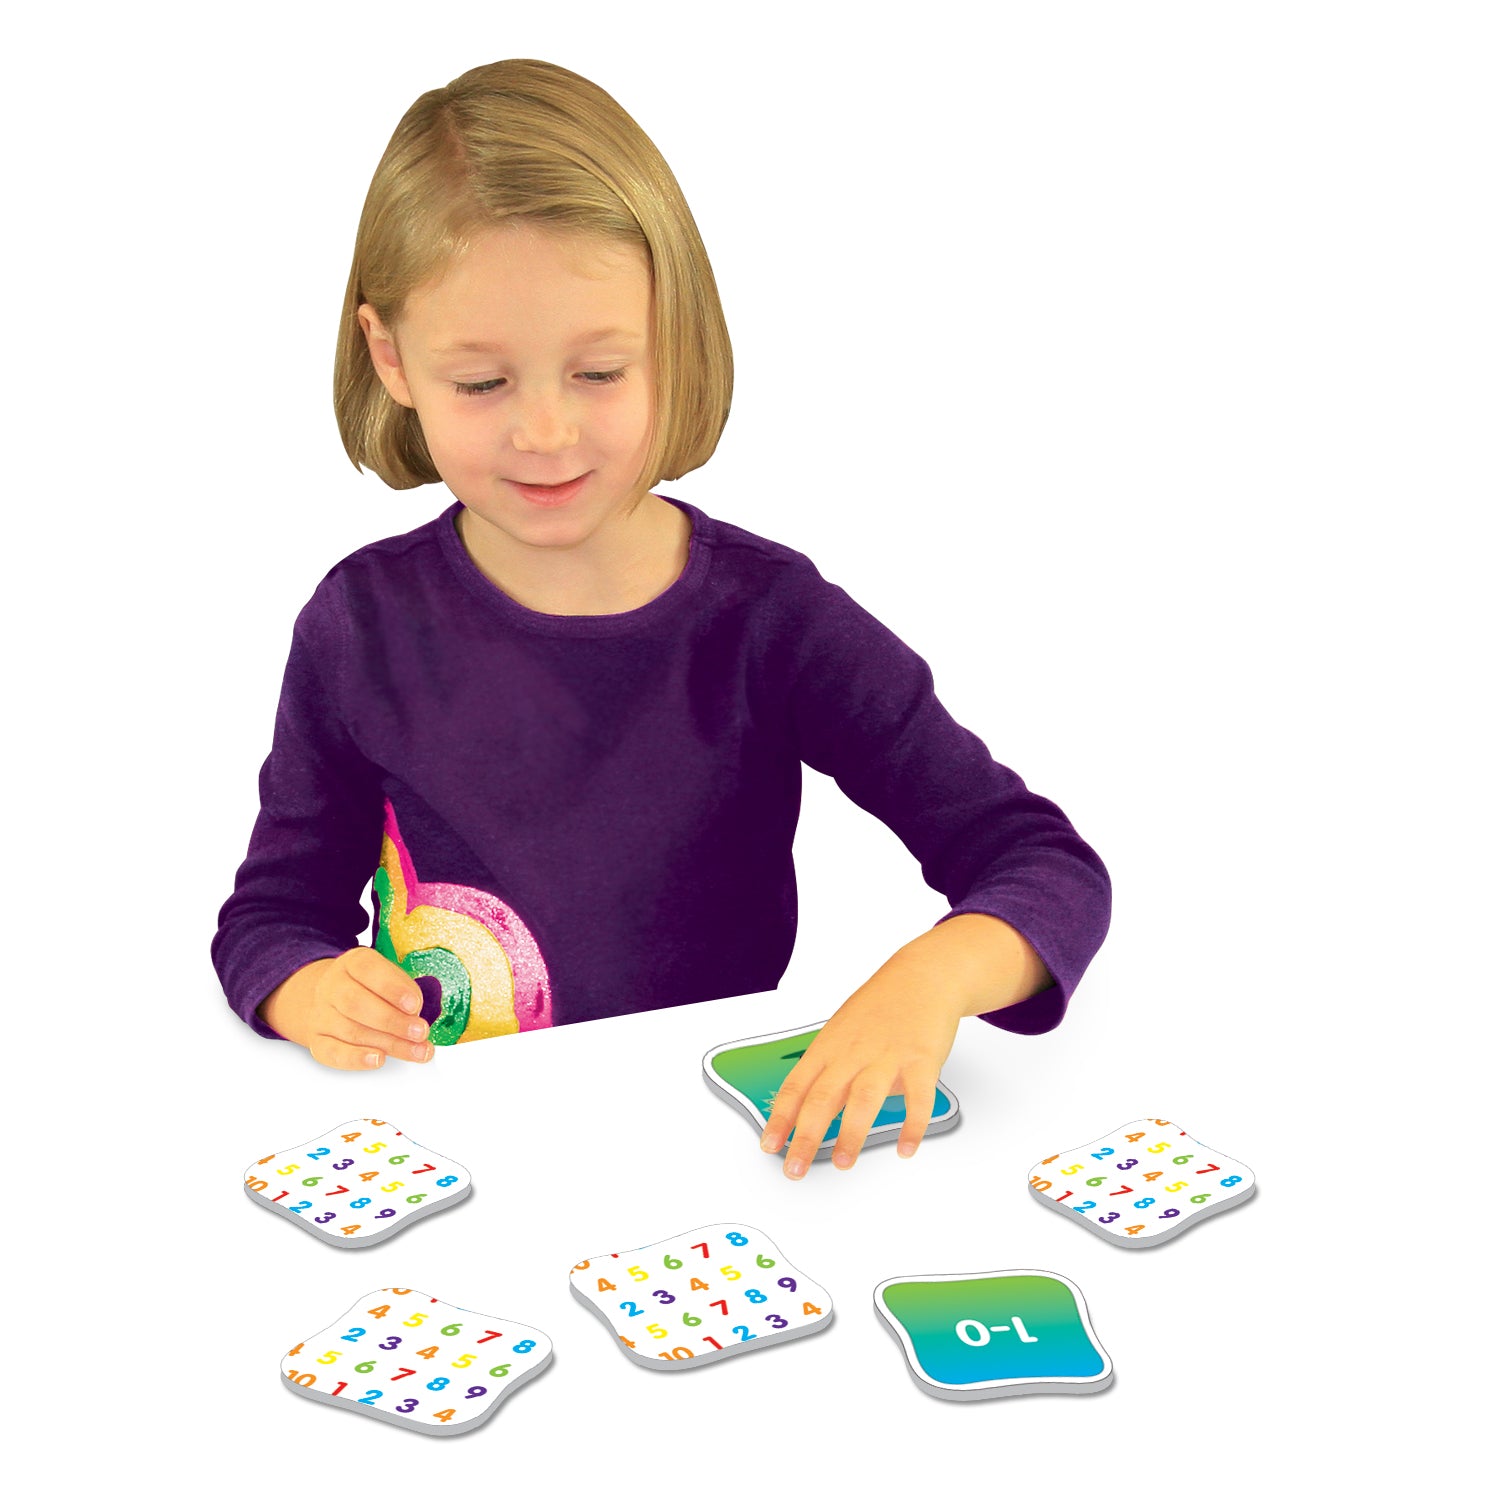 Little girl playing with Match It - Math Memory